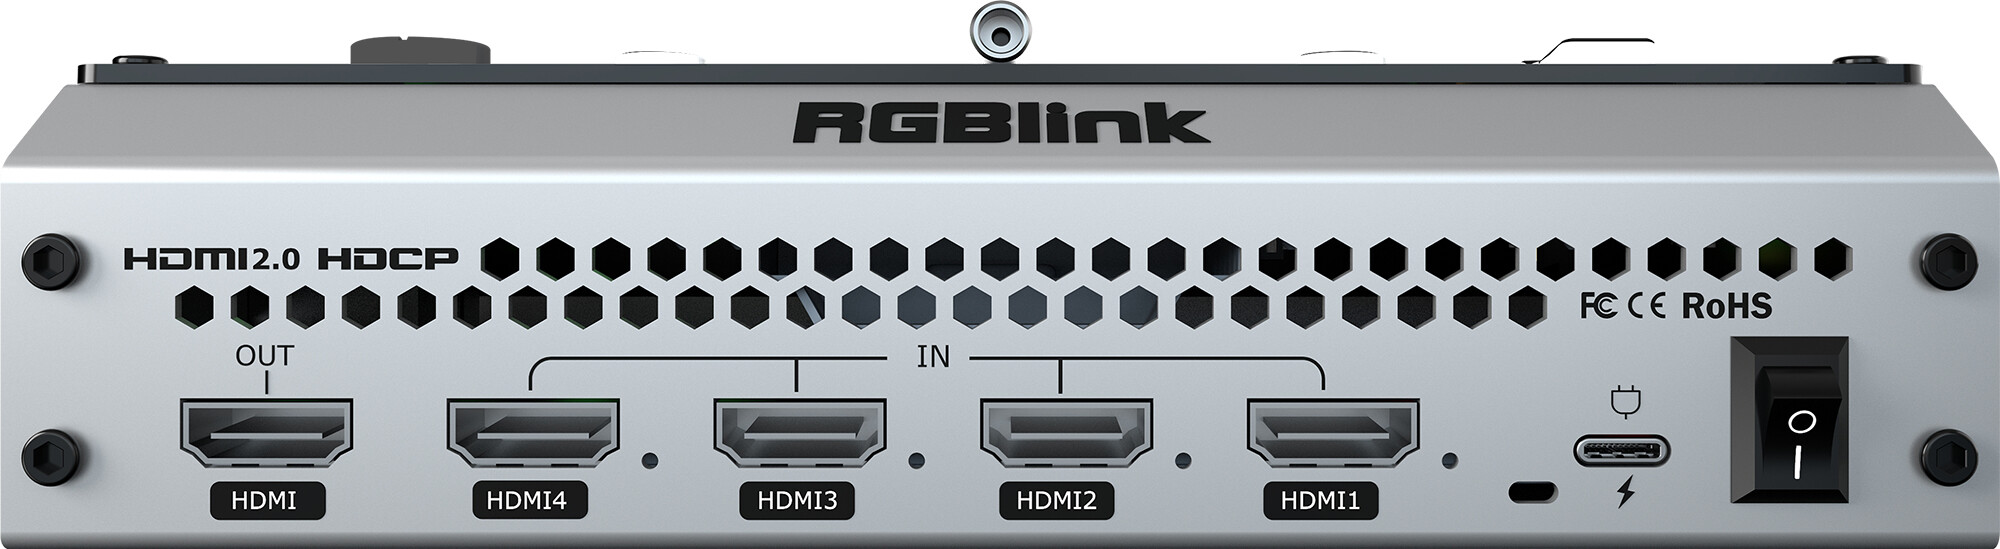 RGBlink-MINI-Pro-Live-Streaming-Video-Mischer